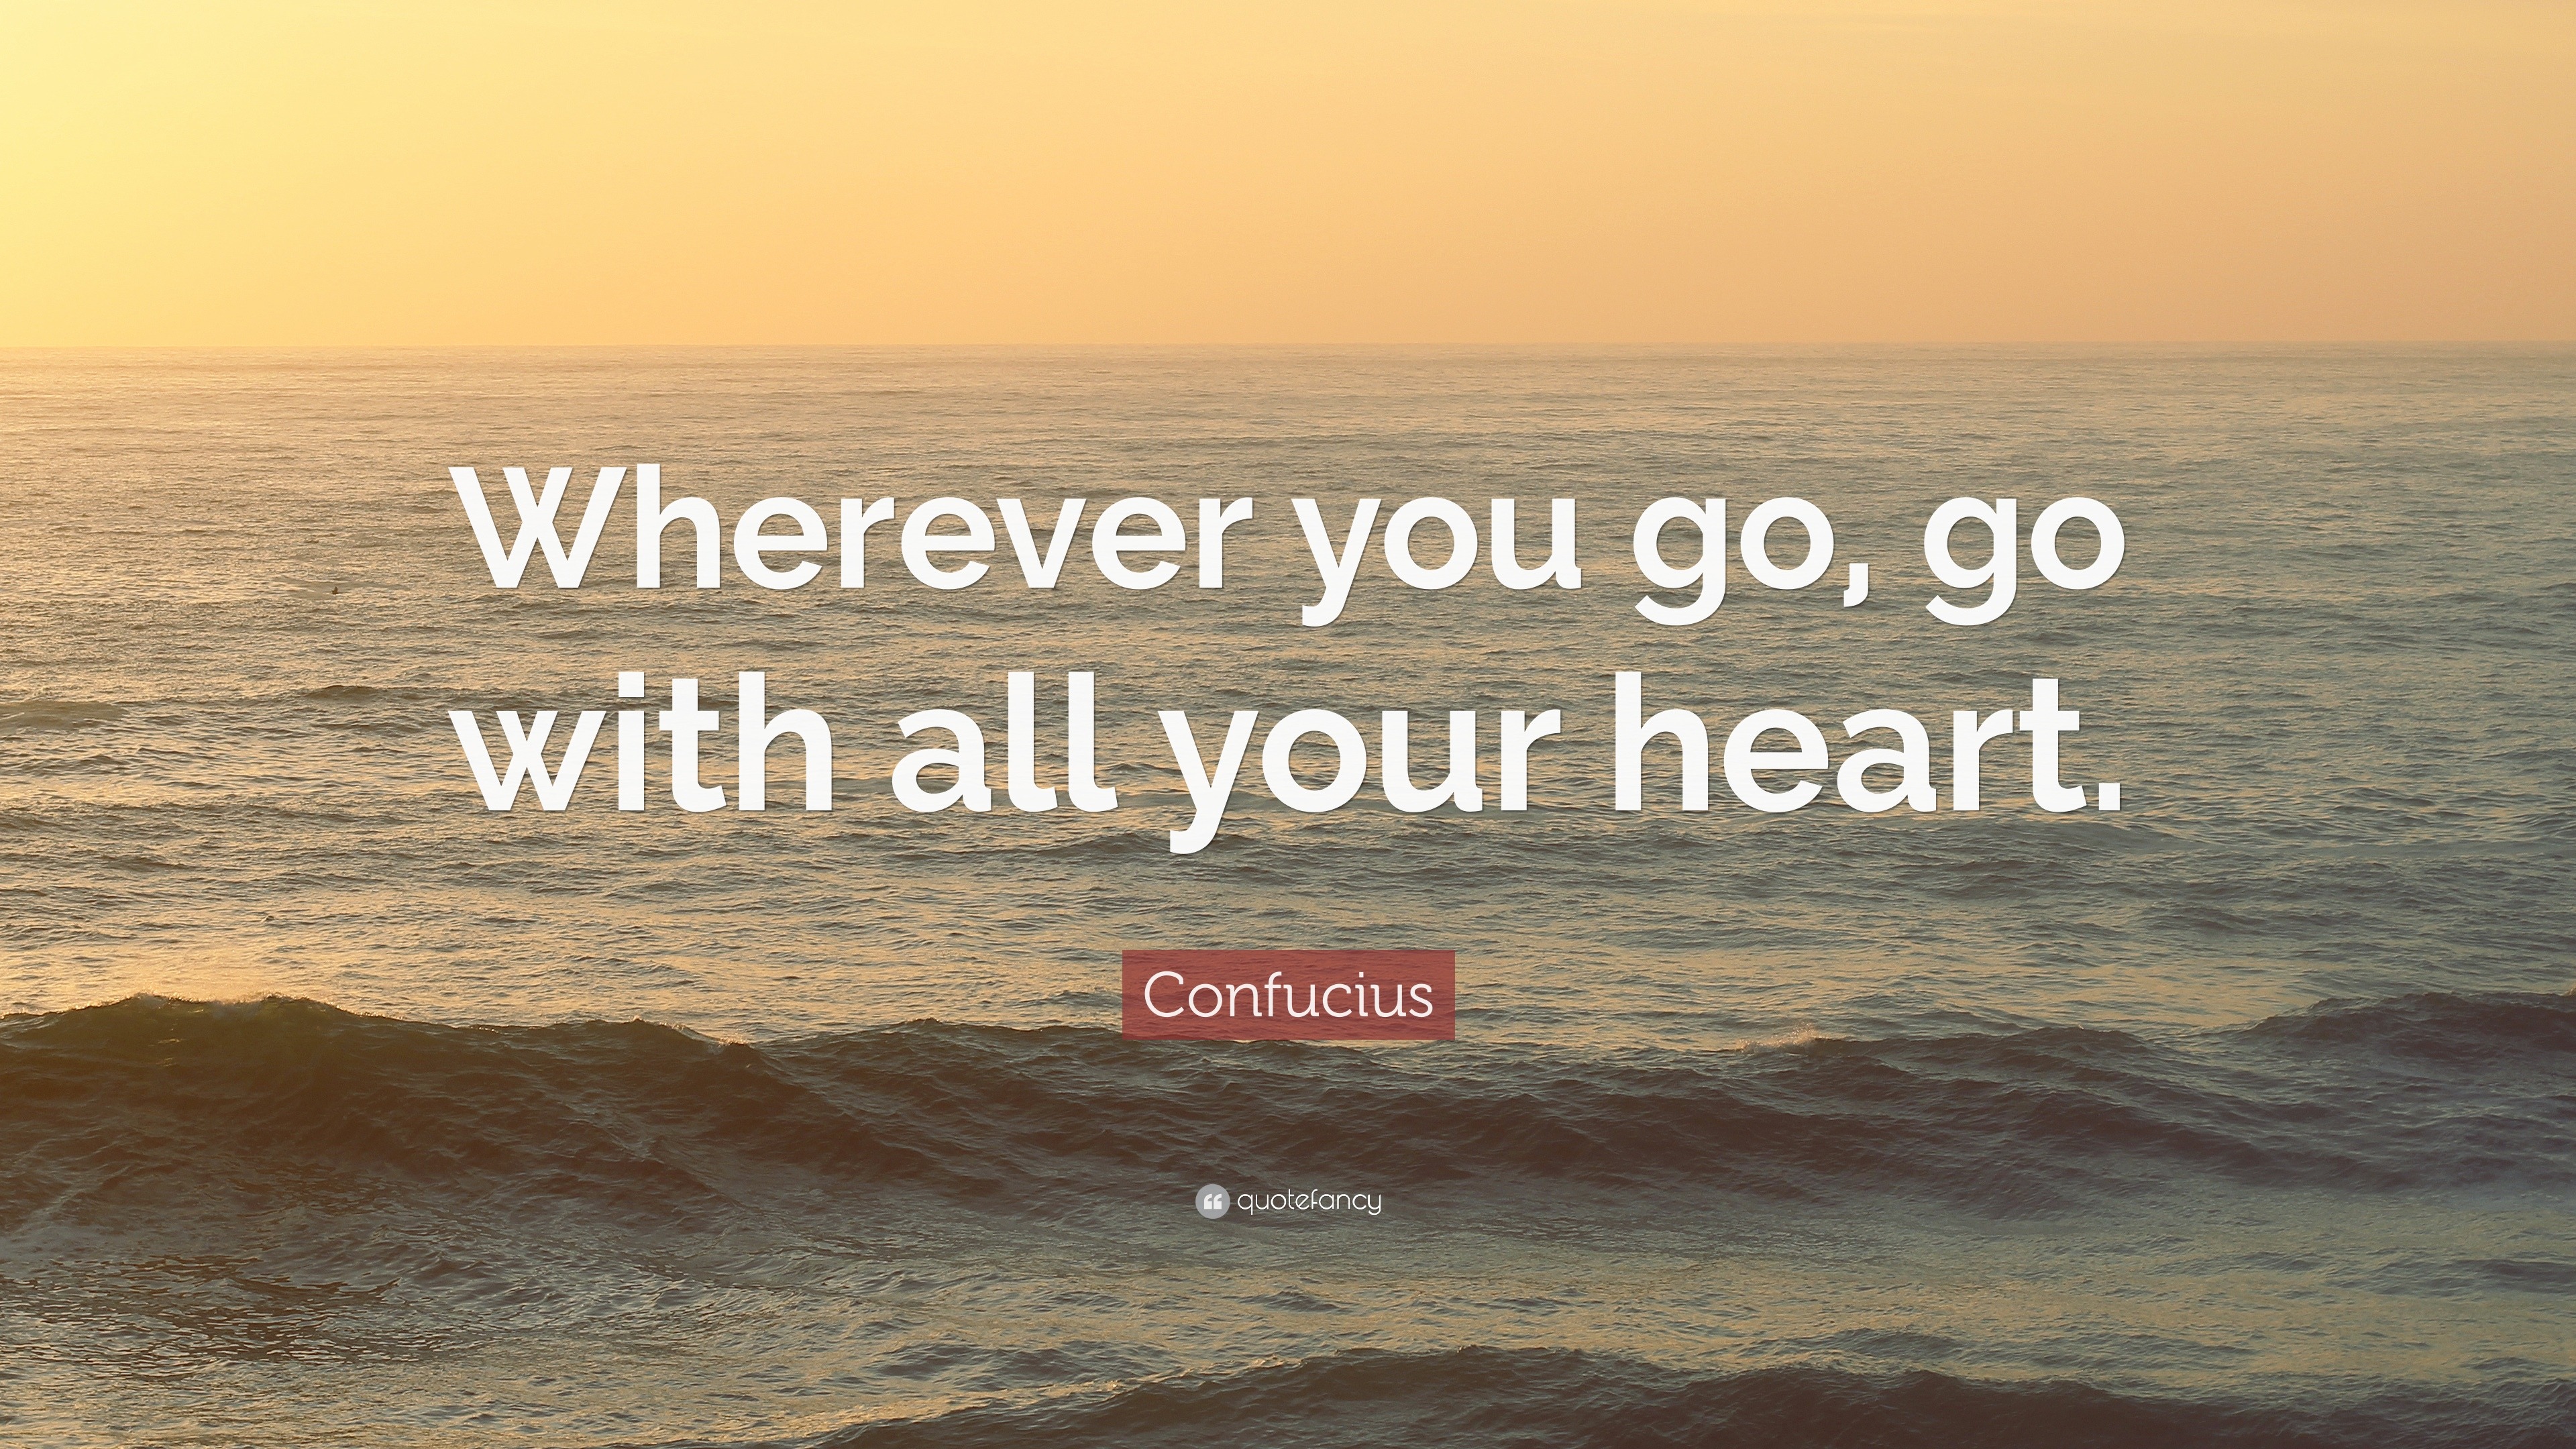 Confucius Quote “Wherever you go go with all your heart ”